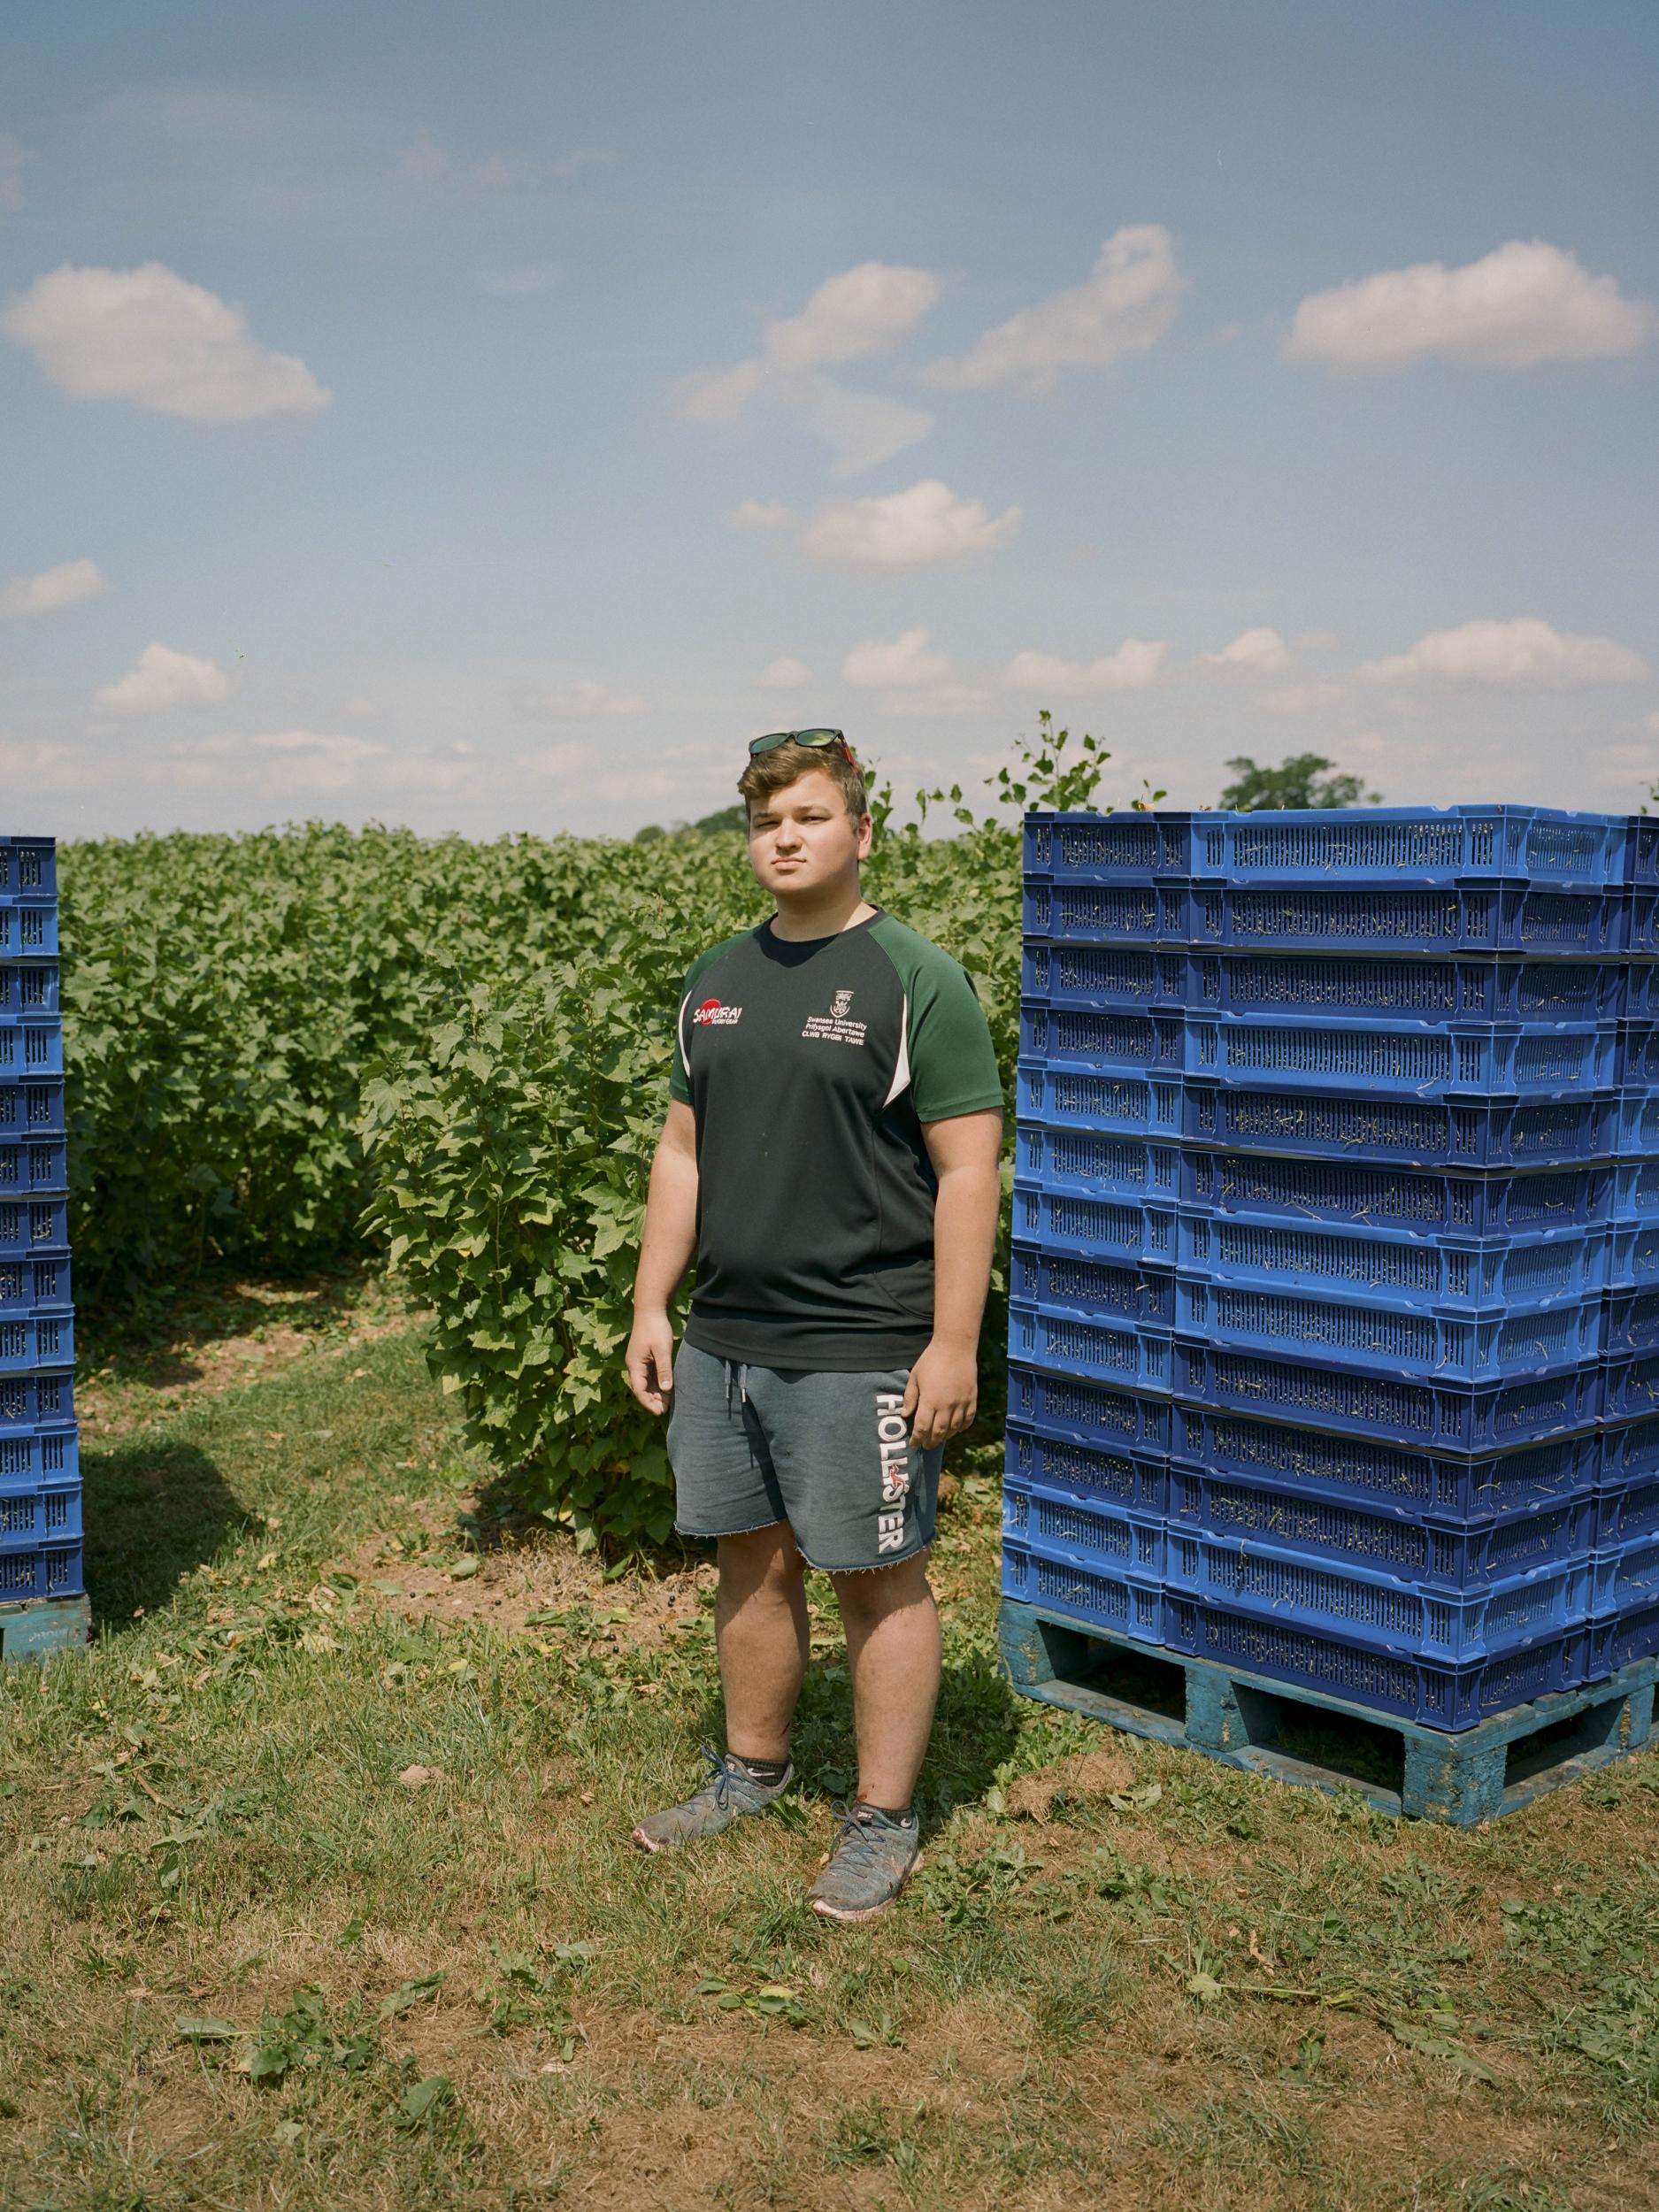 British university student Max Hughes took a summer job at the AJ &amp; CI Snell farm in Herefordshire